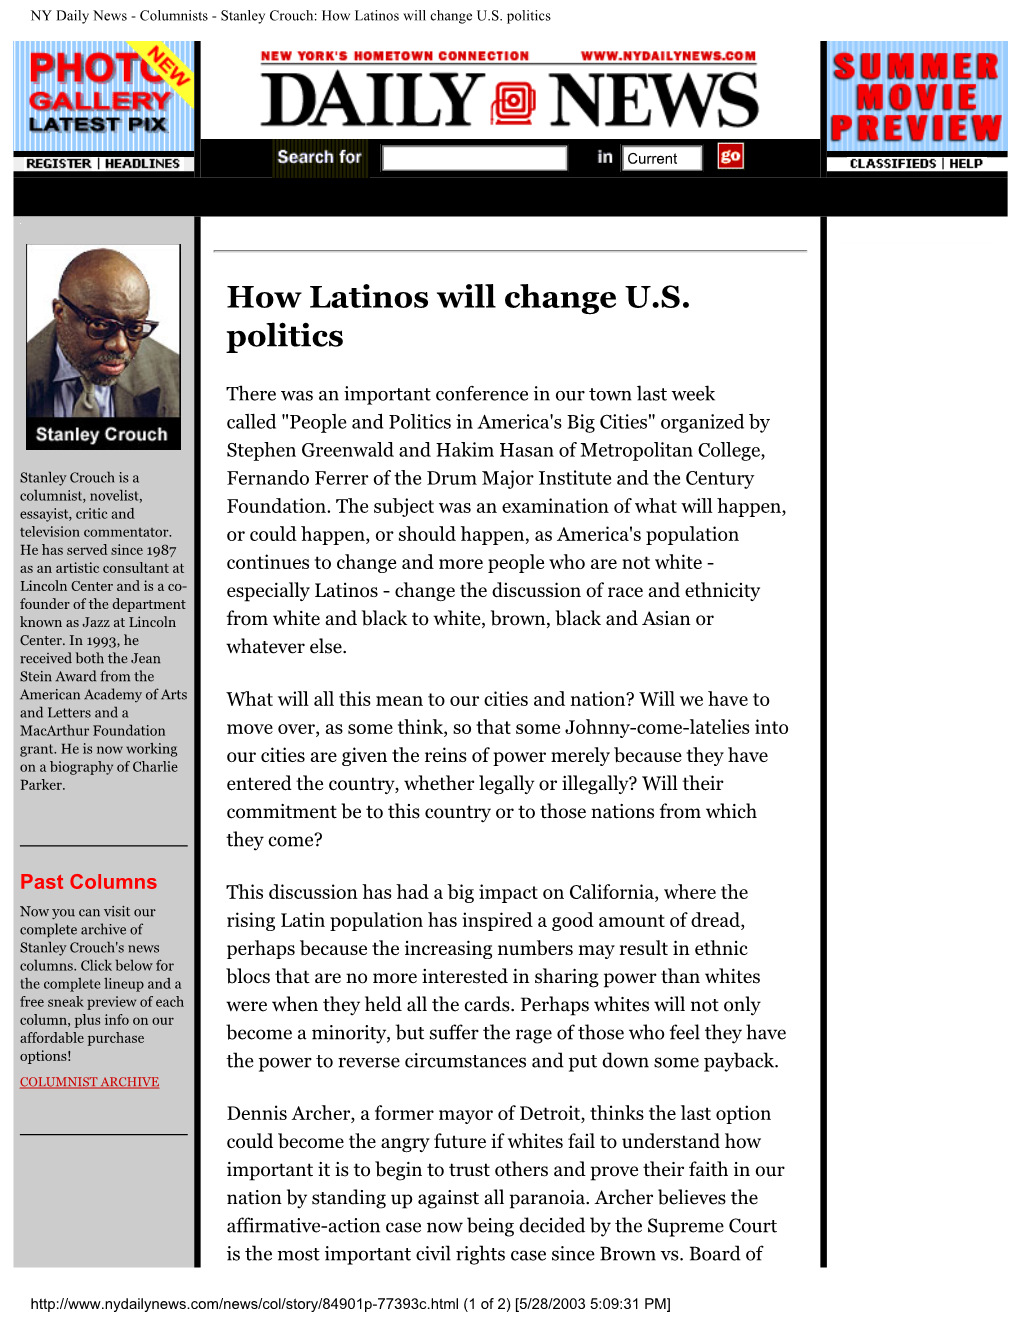 NY Daily News - Columnists - Stanley Crouch: How Latinos Will Change U.S